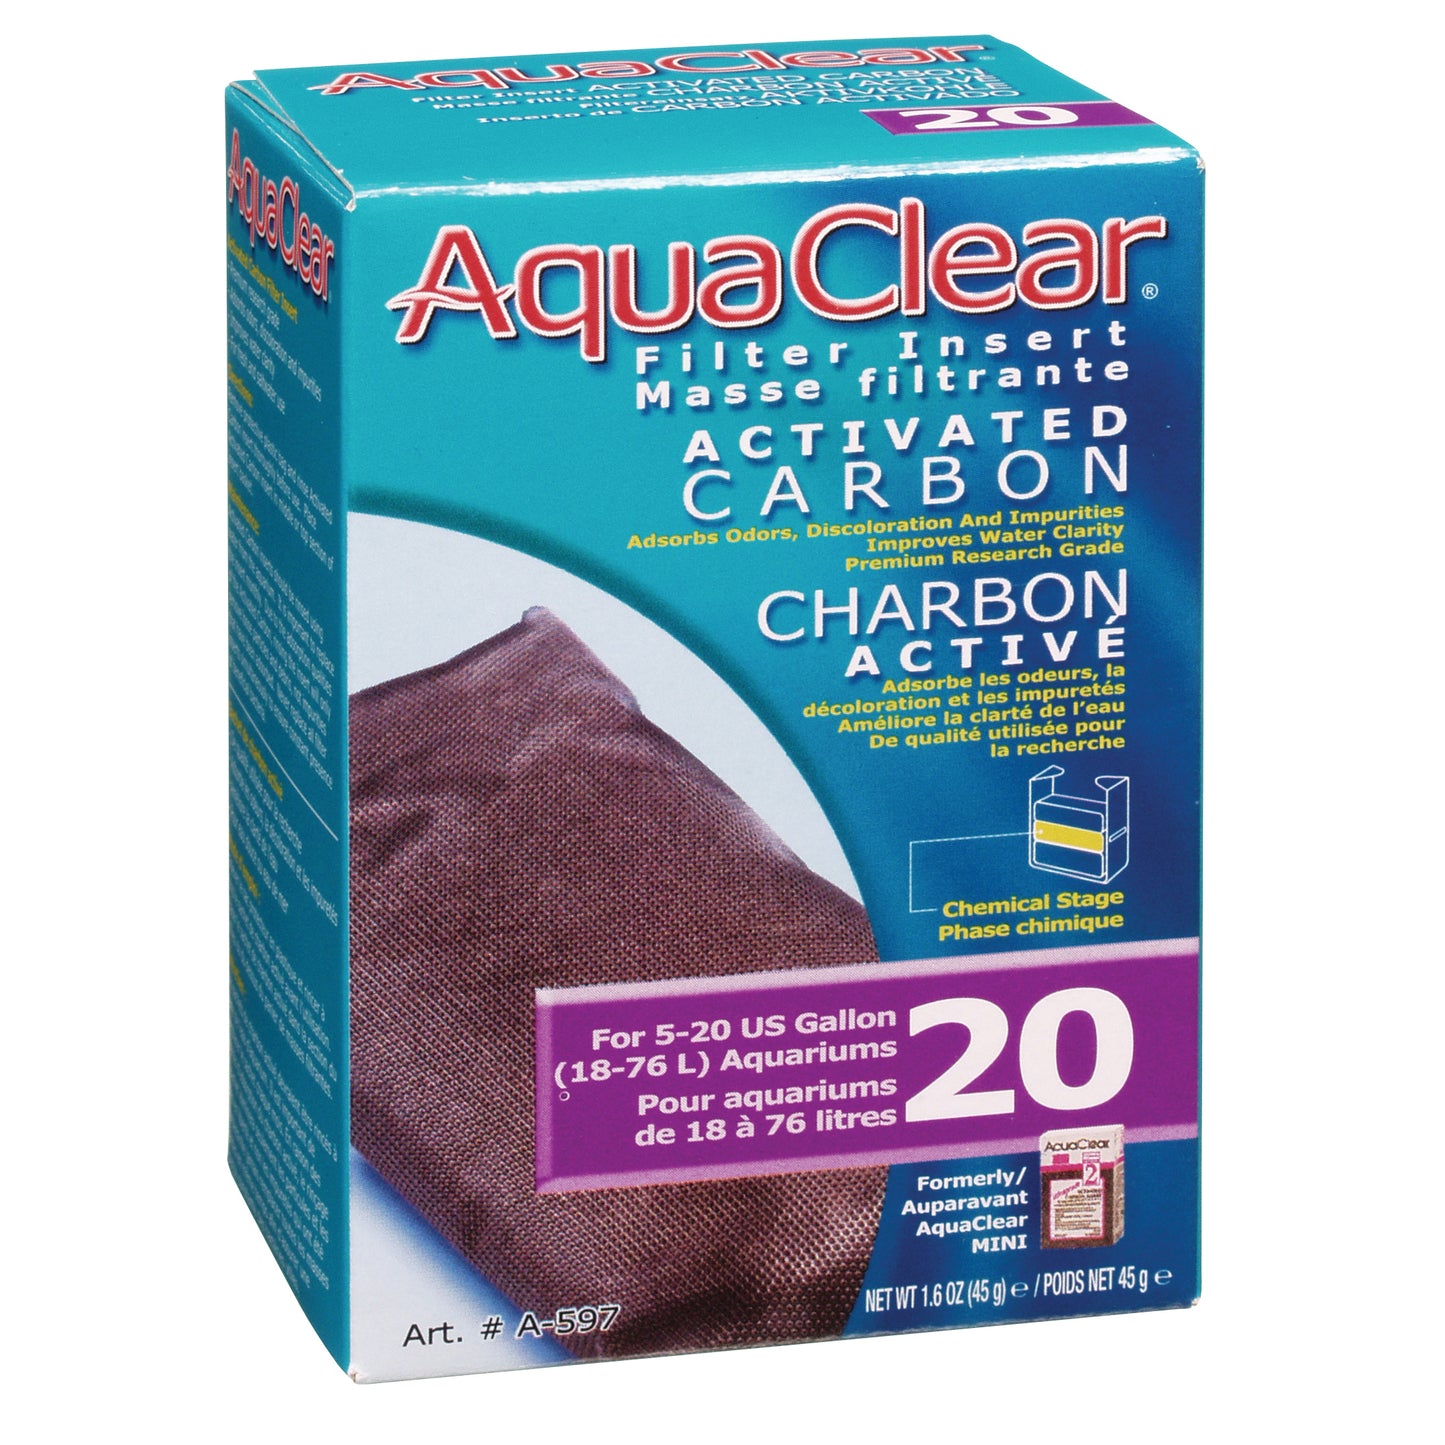 AquaClear 20 Activated Carbon Filter Insert